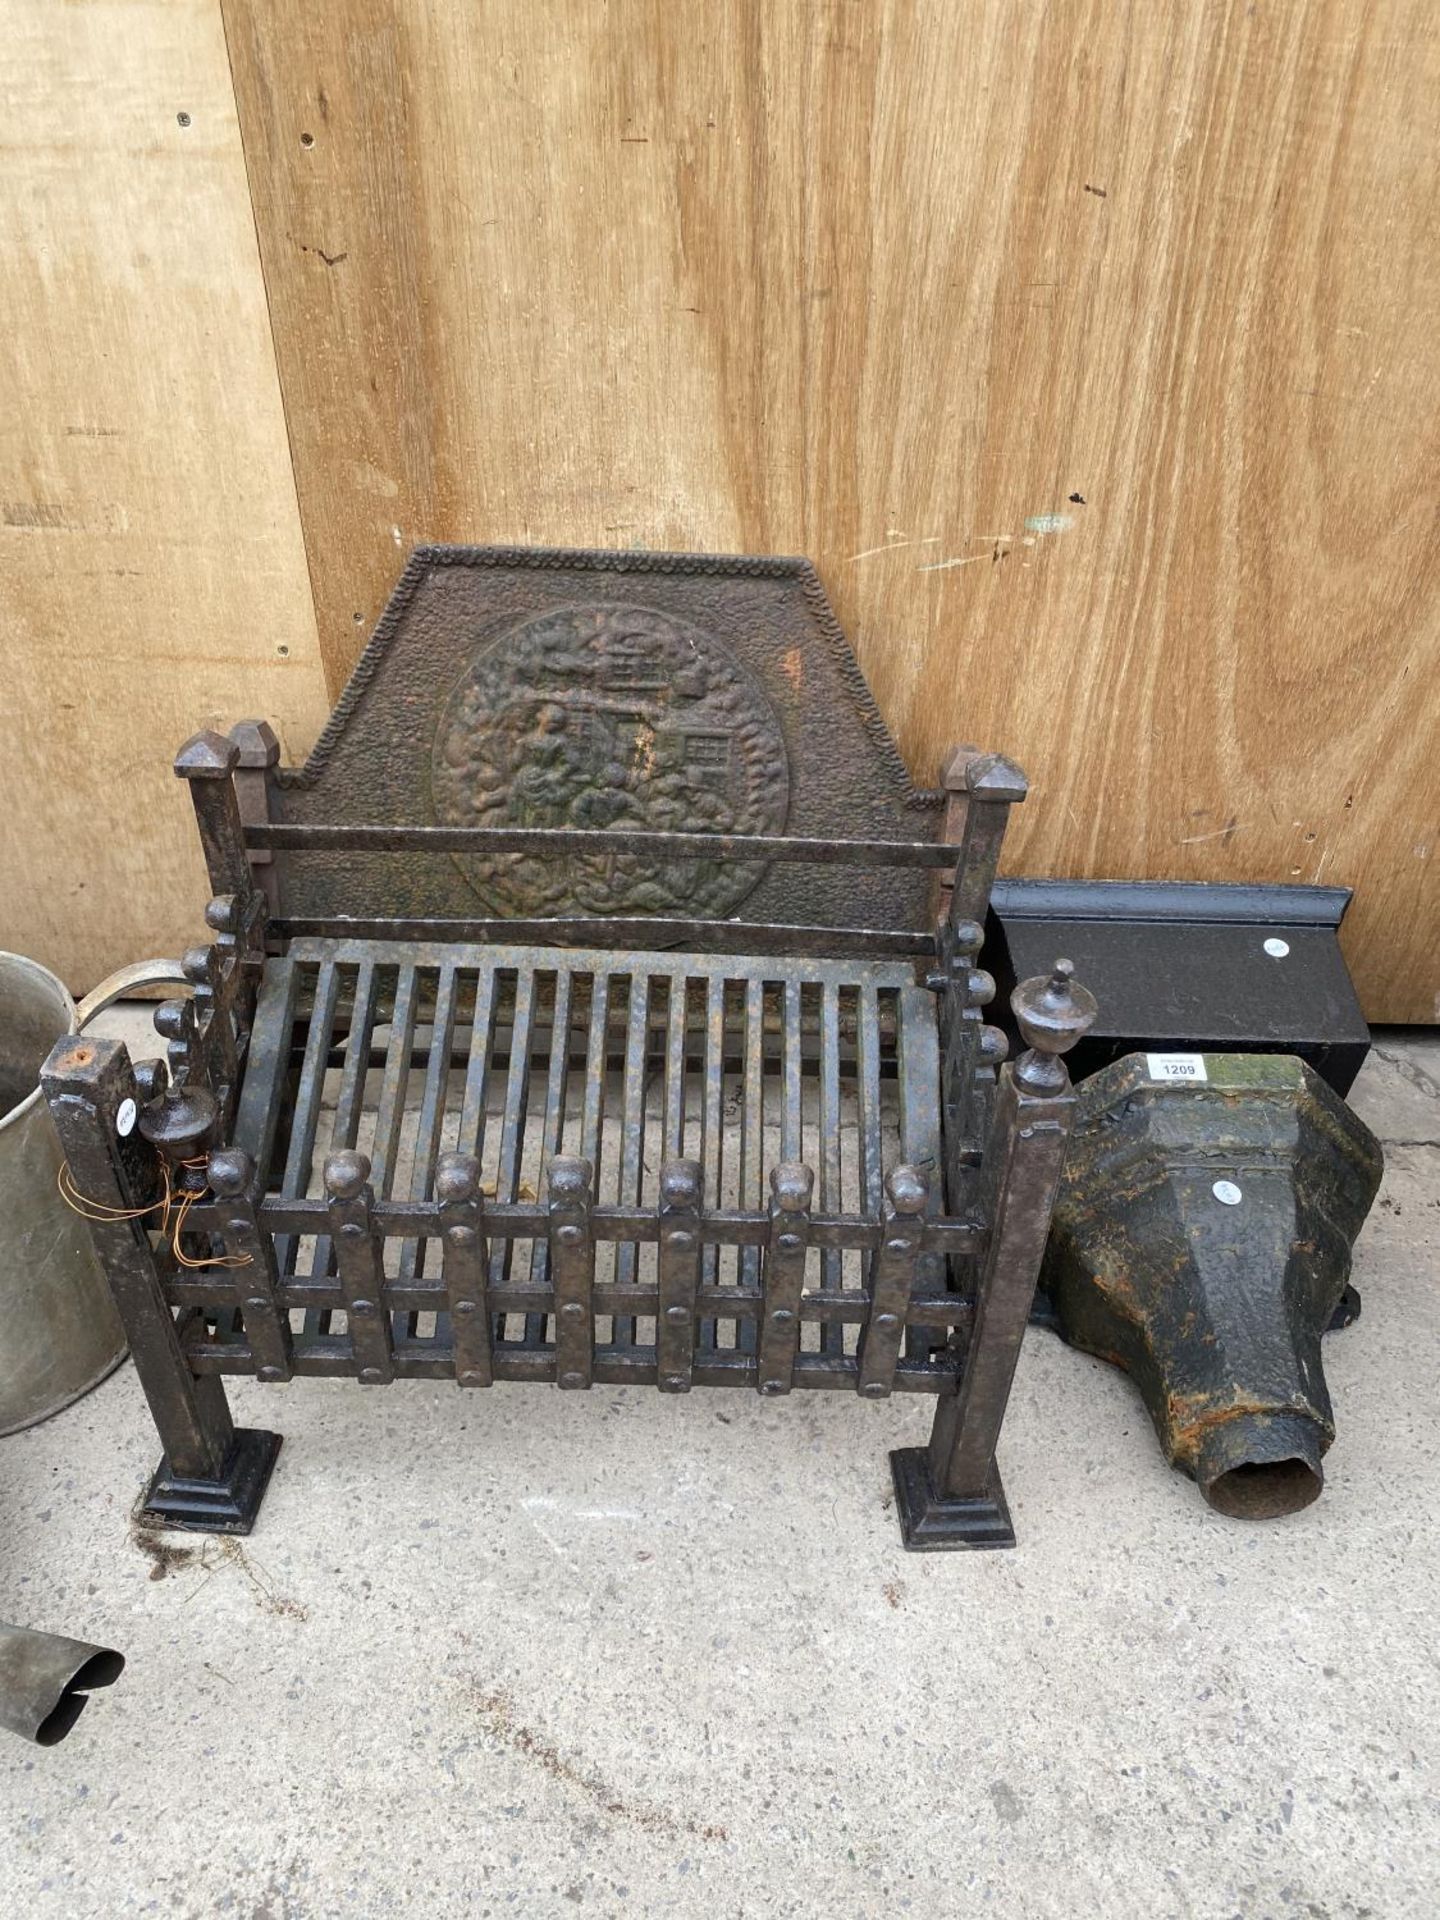 TWO VINTAGE CAST IRON GUTTER HOPPERS AND A CAST IRON FIRE GRATE - Image 2 of 8